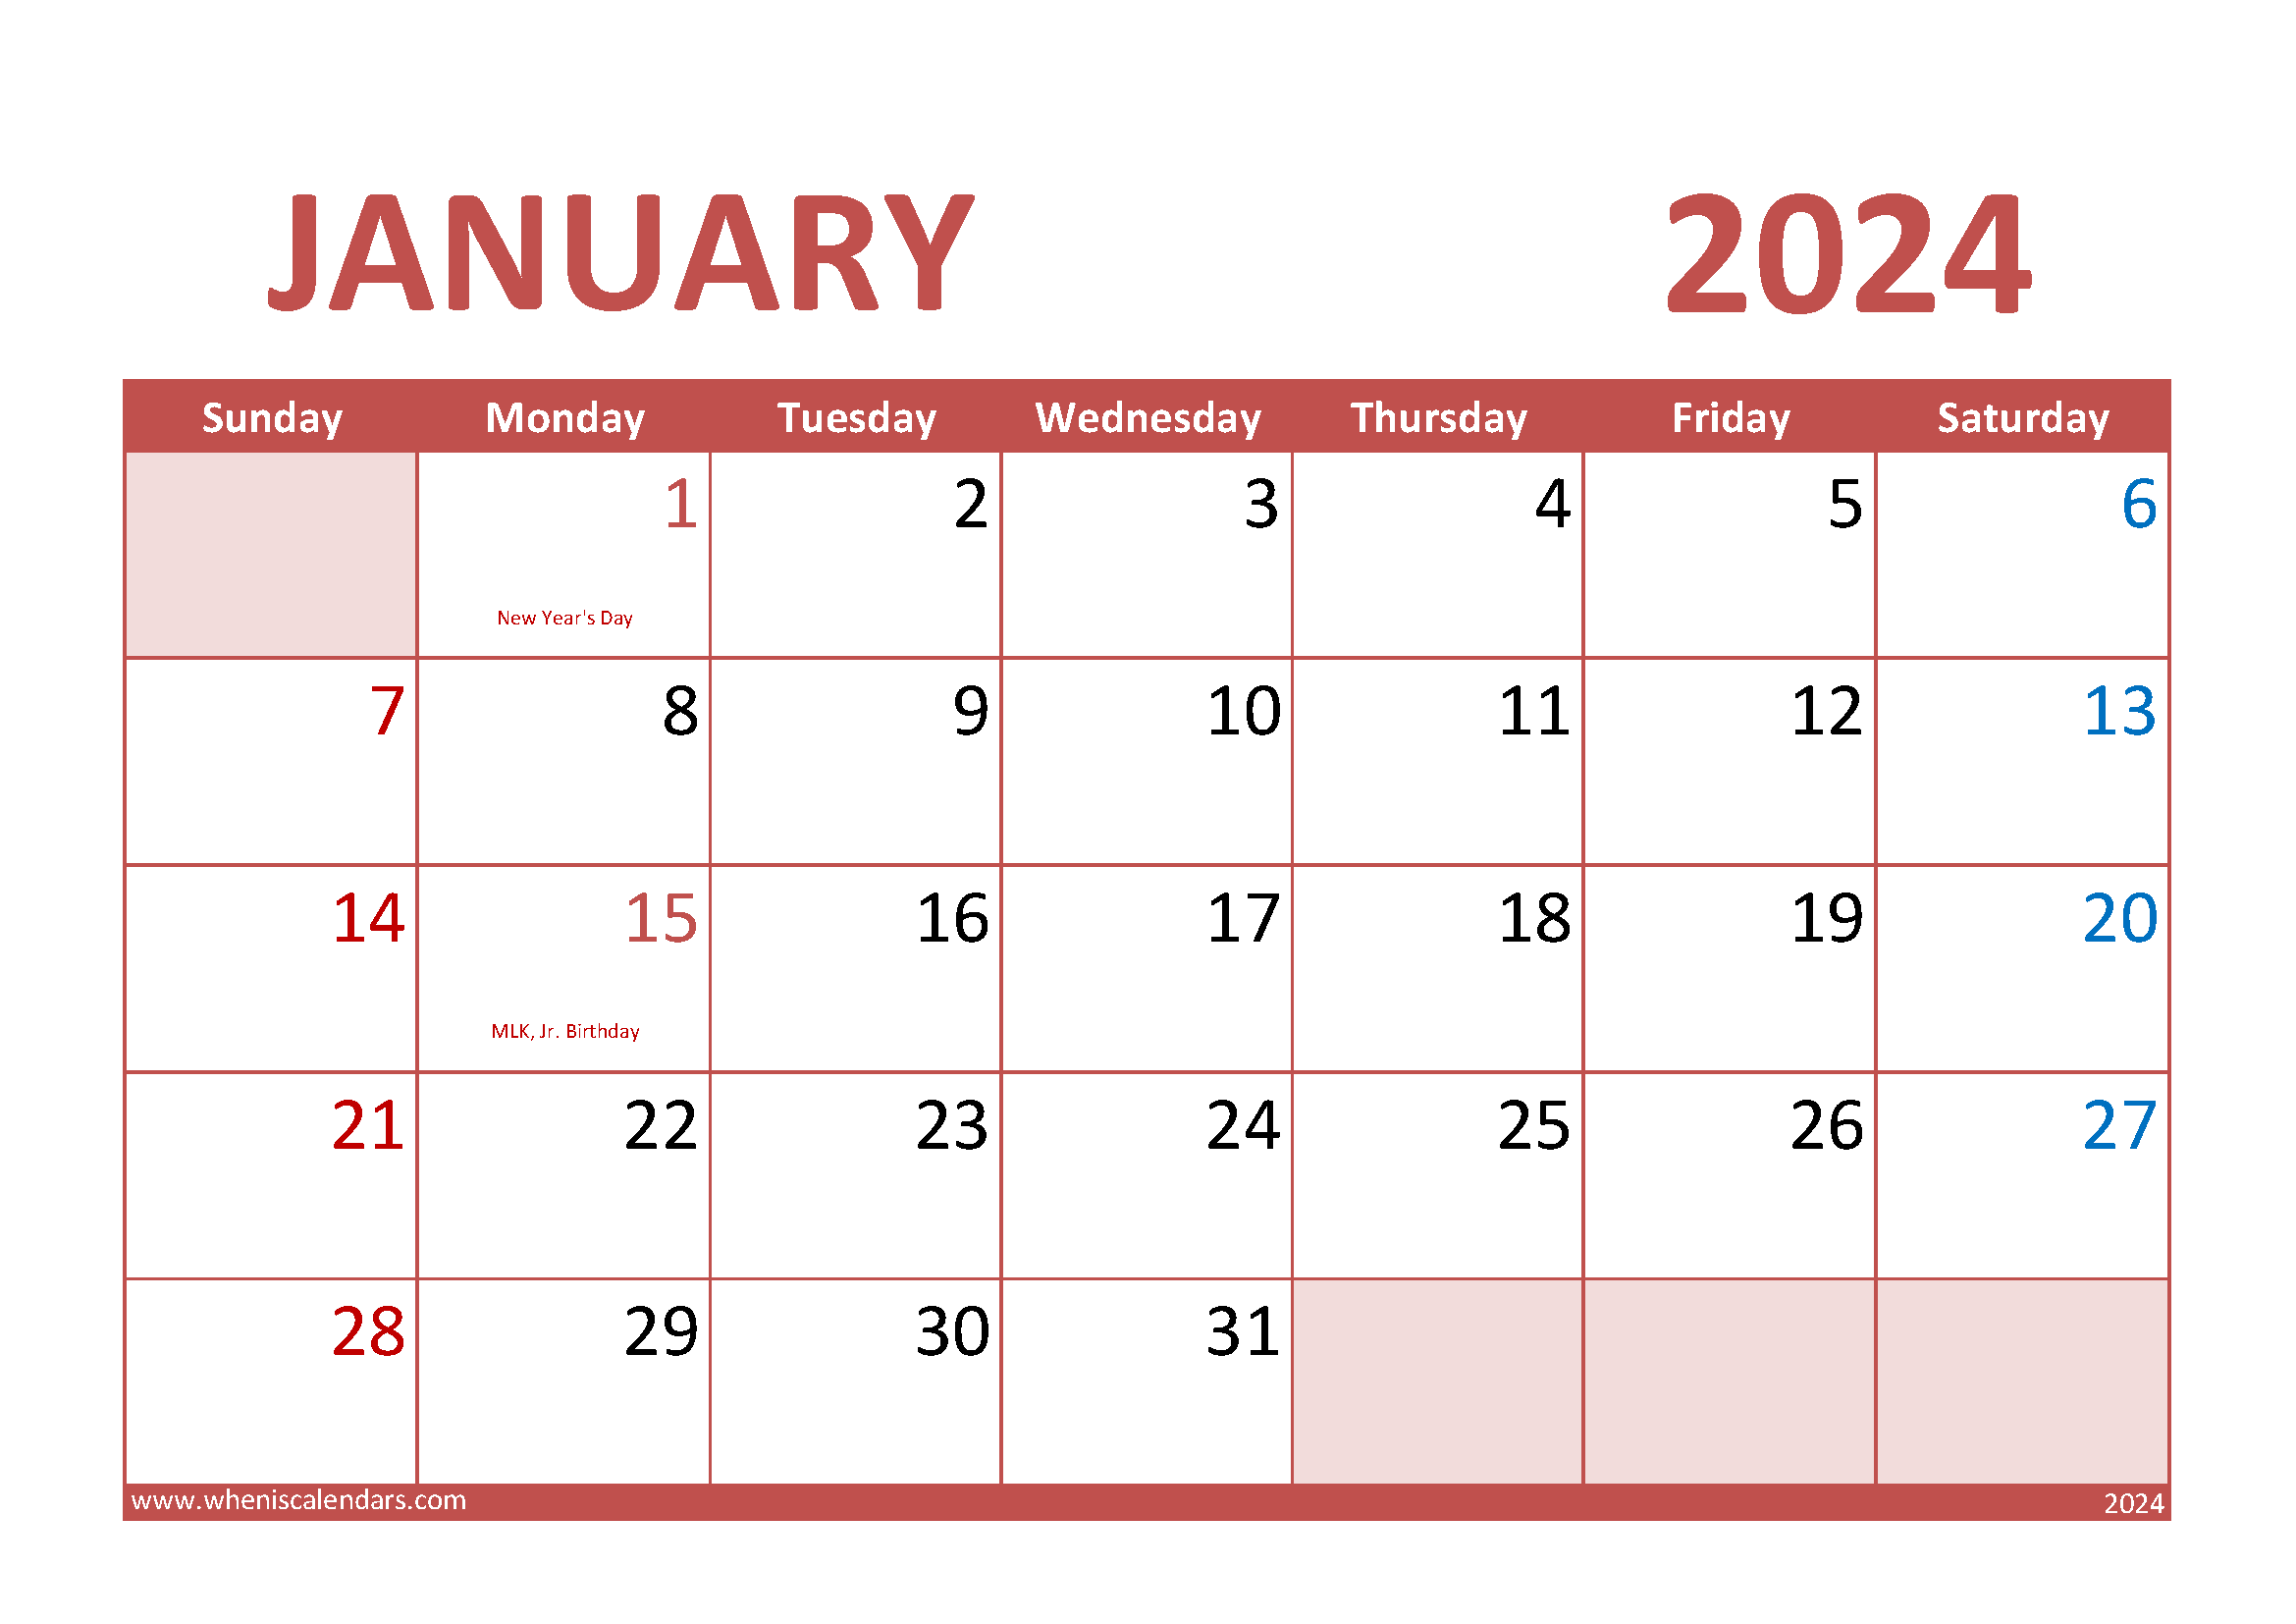 special days in January 2024 J14013